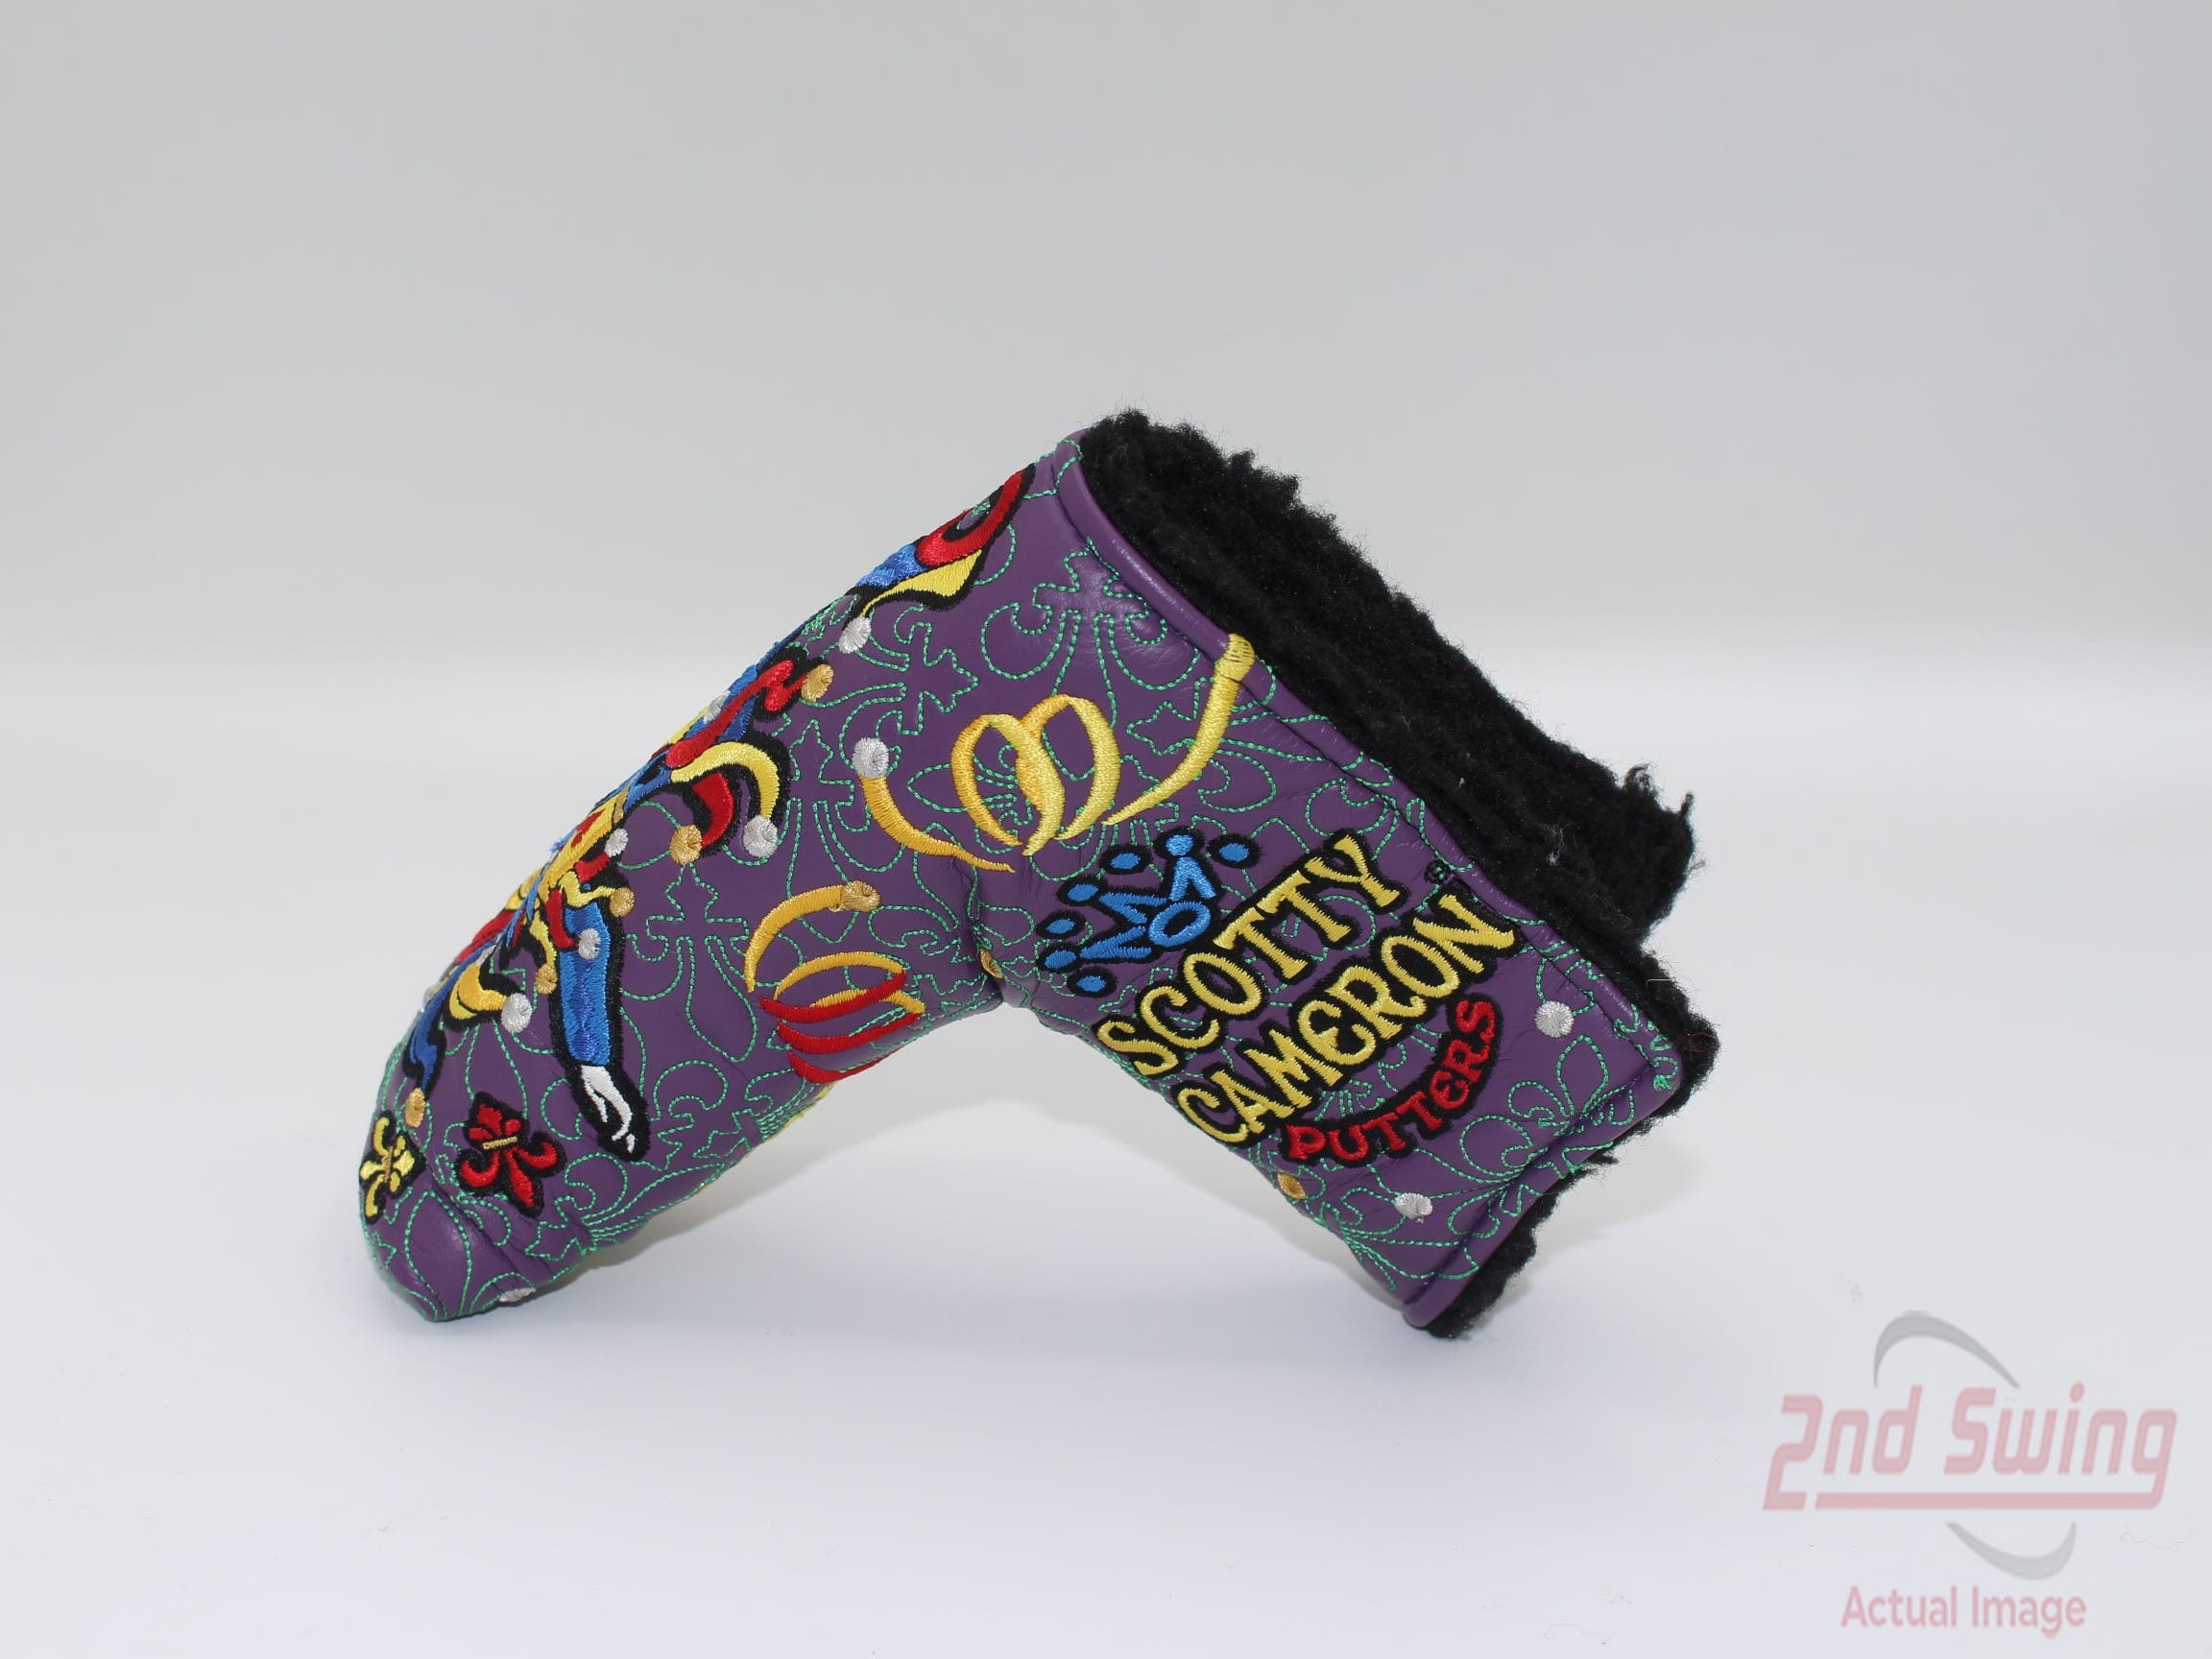 Titleist Scotty Cameron Limited Edition Putter Headcover (D-D2228096379)